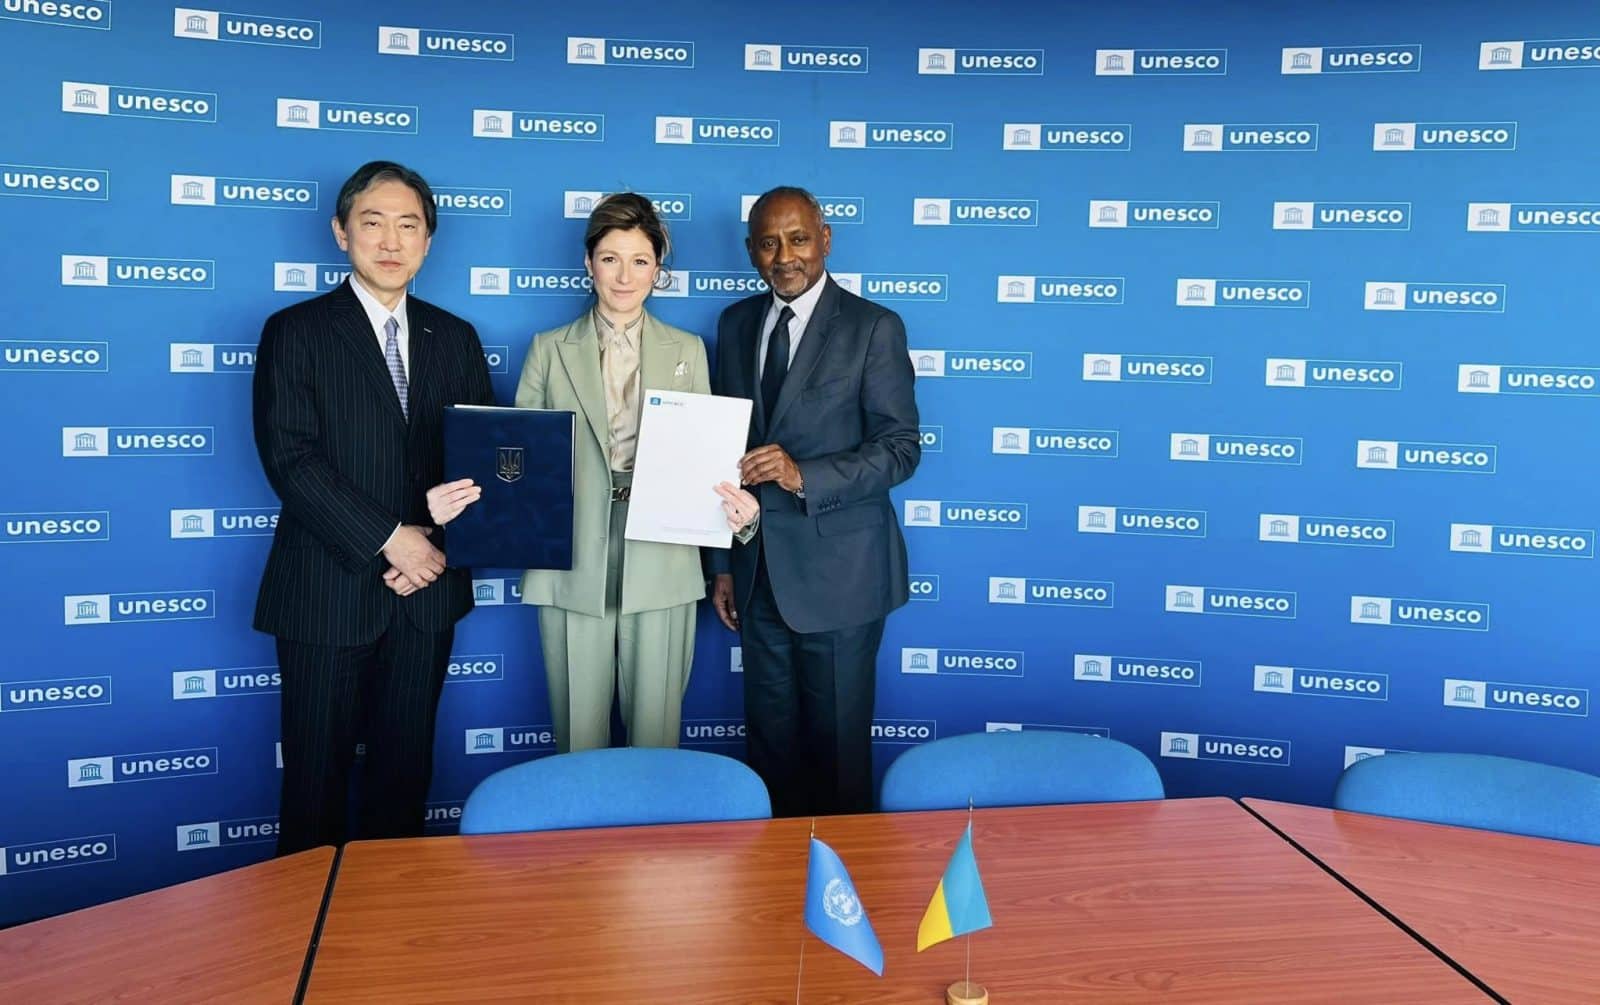 Ukraine will receive $10M from Japan for UNESCO projects